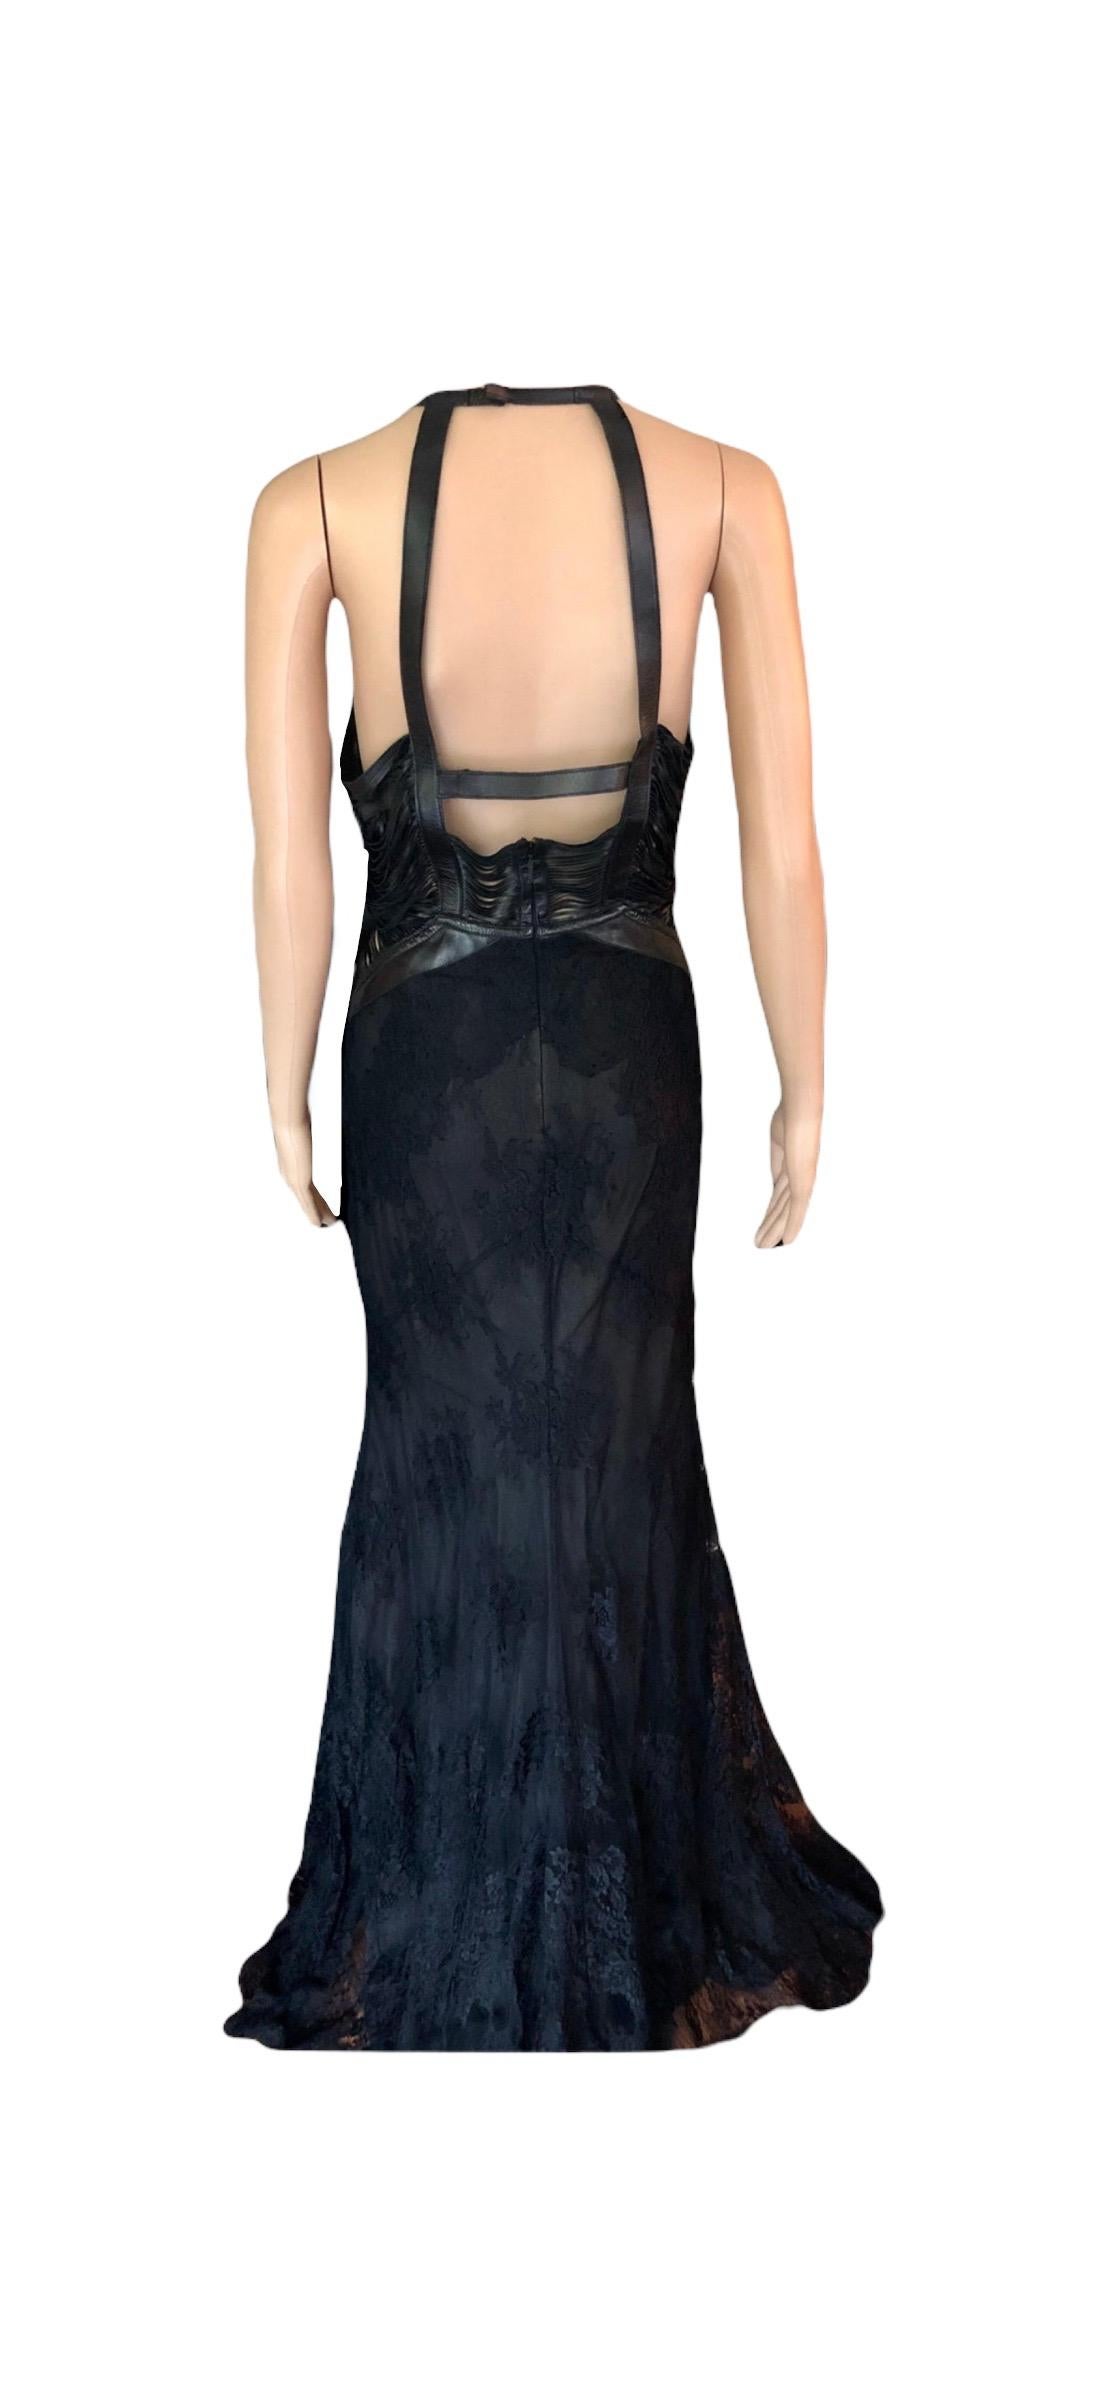 Roberto Cavalli S/S 2013 Leather Cutout Open Back Black Evening Dress Gown For Sale 11